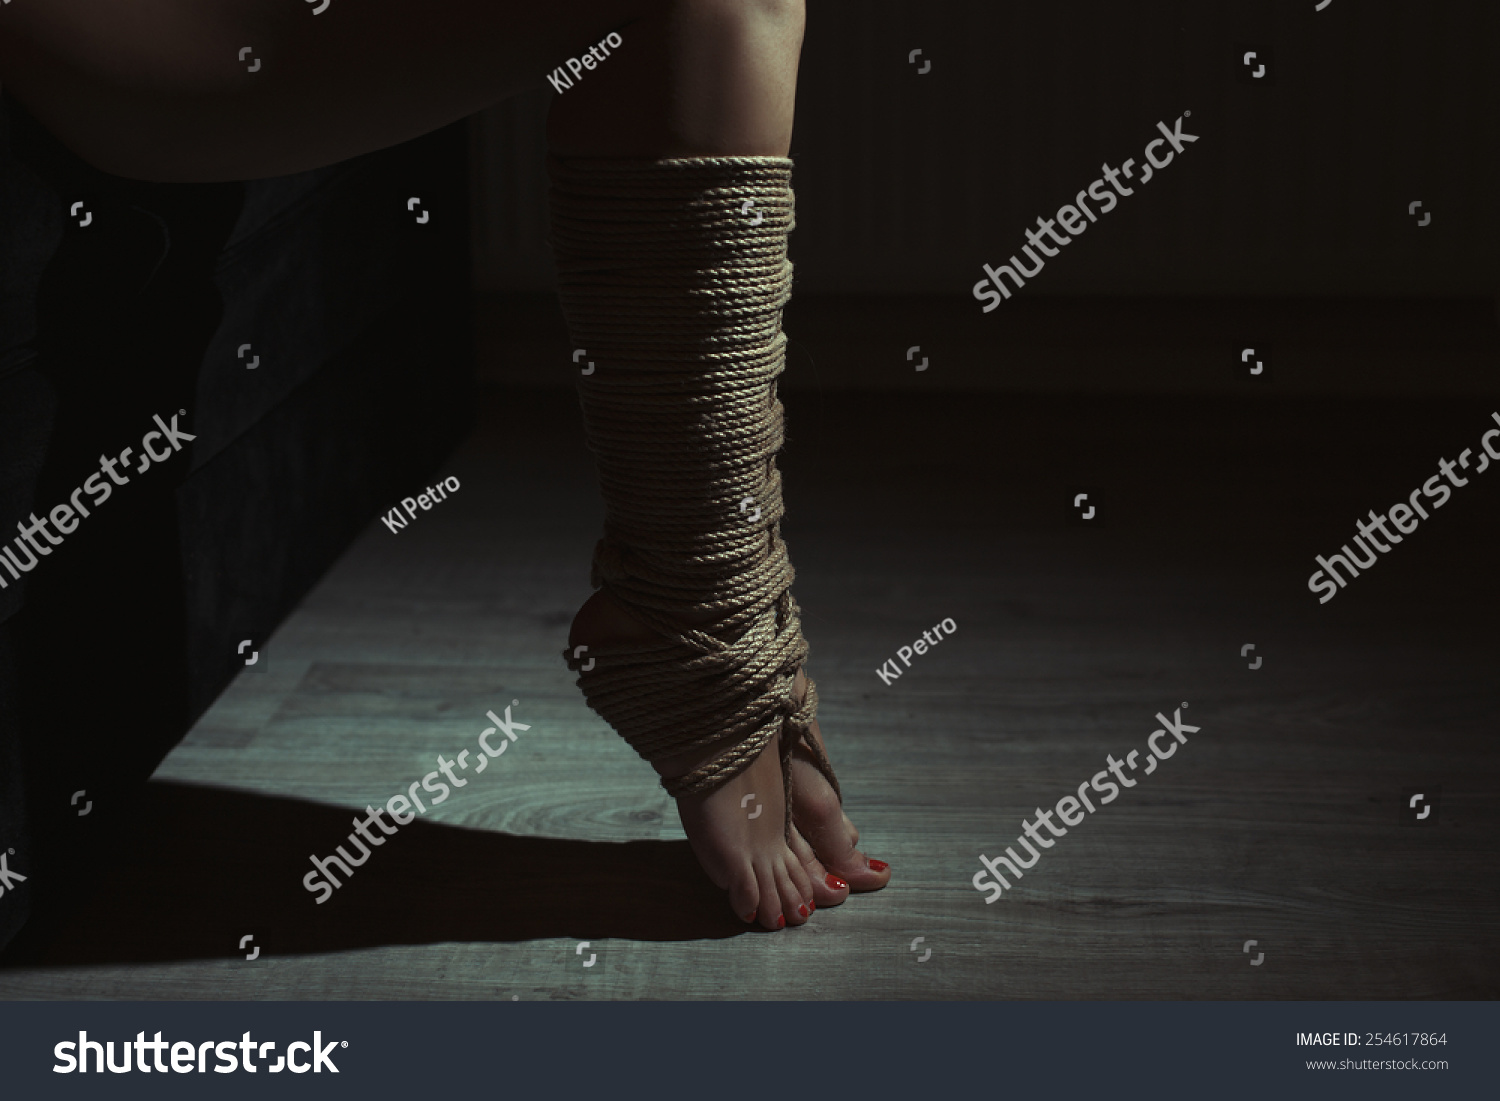 Beautiful Legs Tied With Rope In Bondage Photo Toning 254617864 Shutterstock 4227